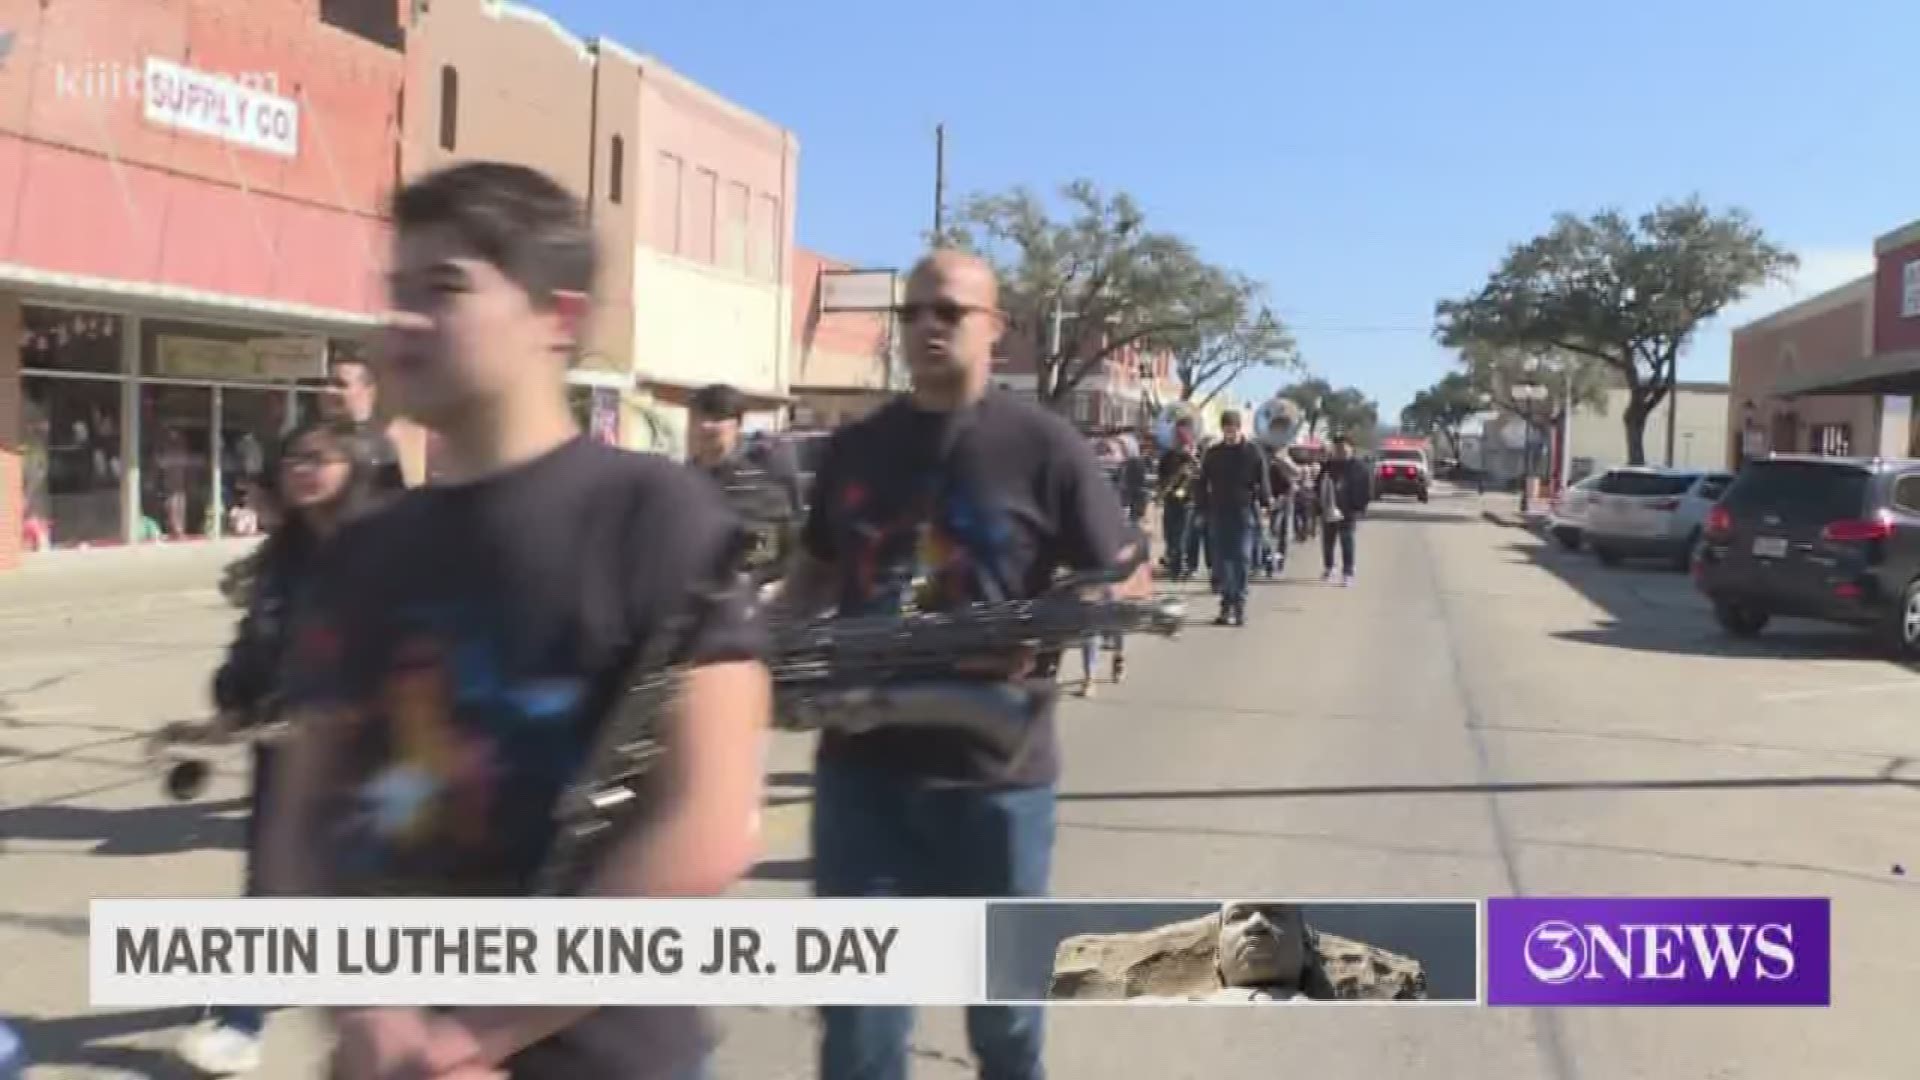 Residents of Kingsville held a parade on Monday in honor of Martin Luther King Jr. Day.